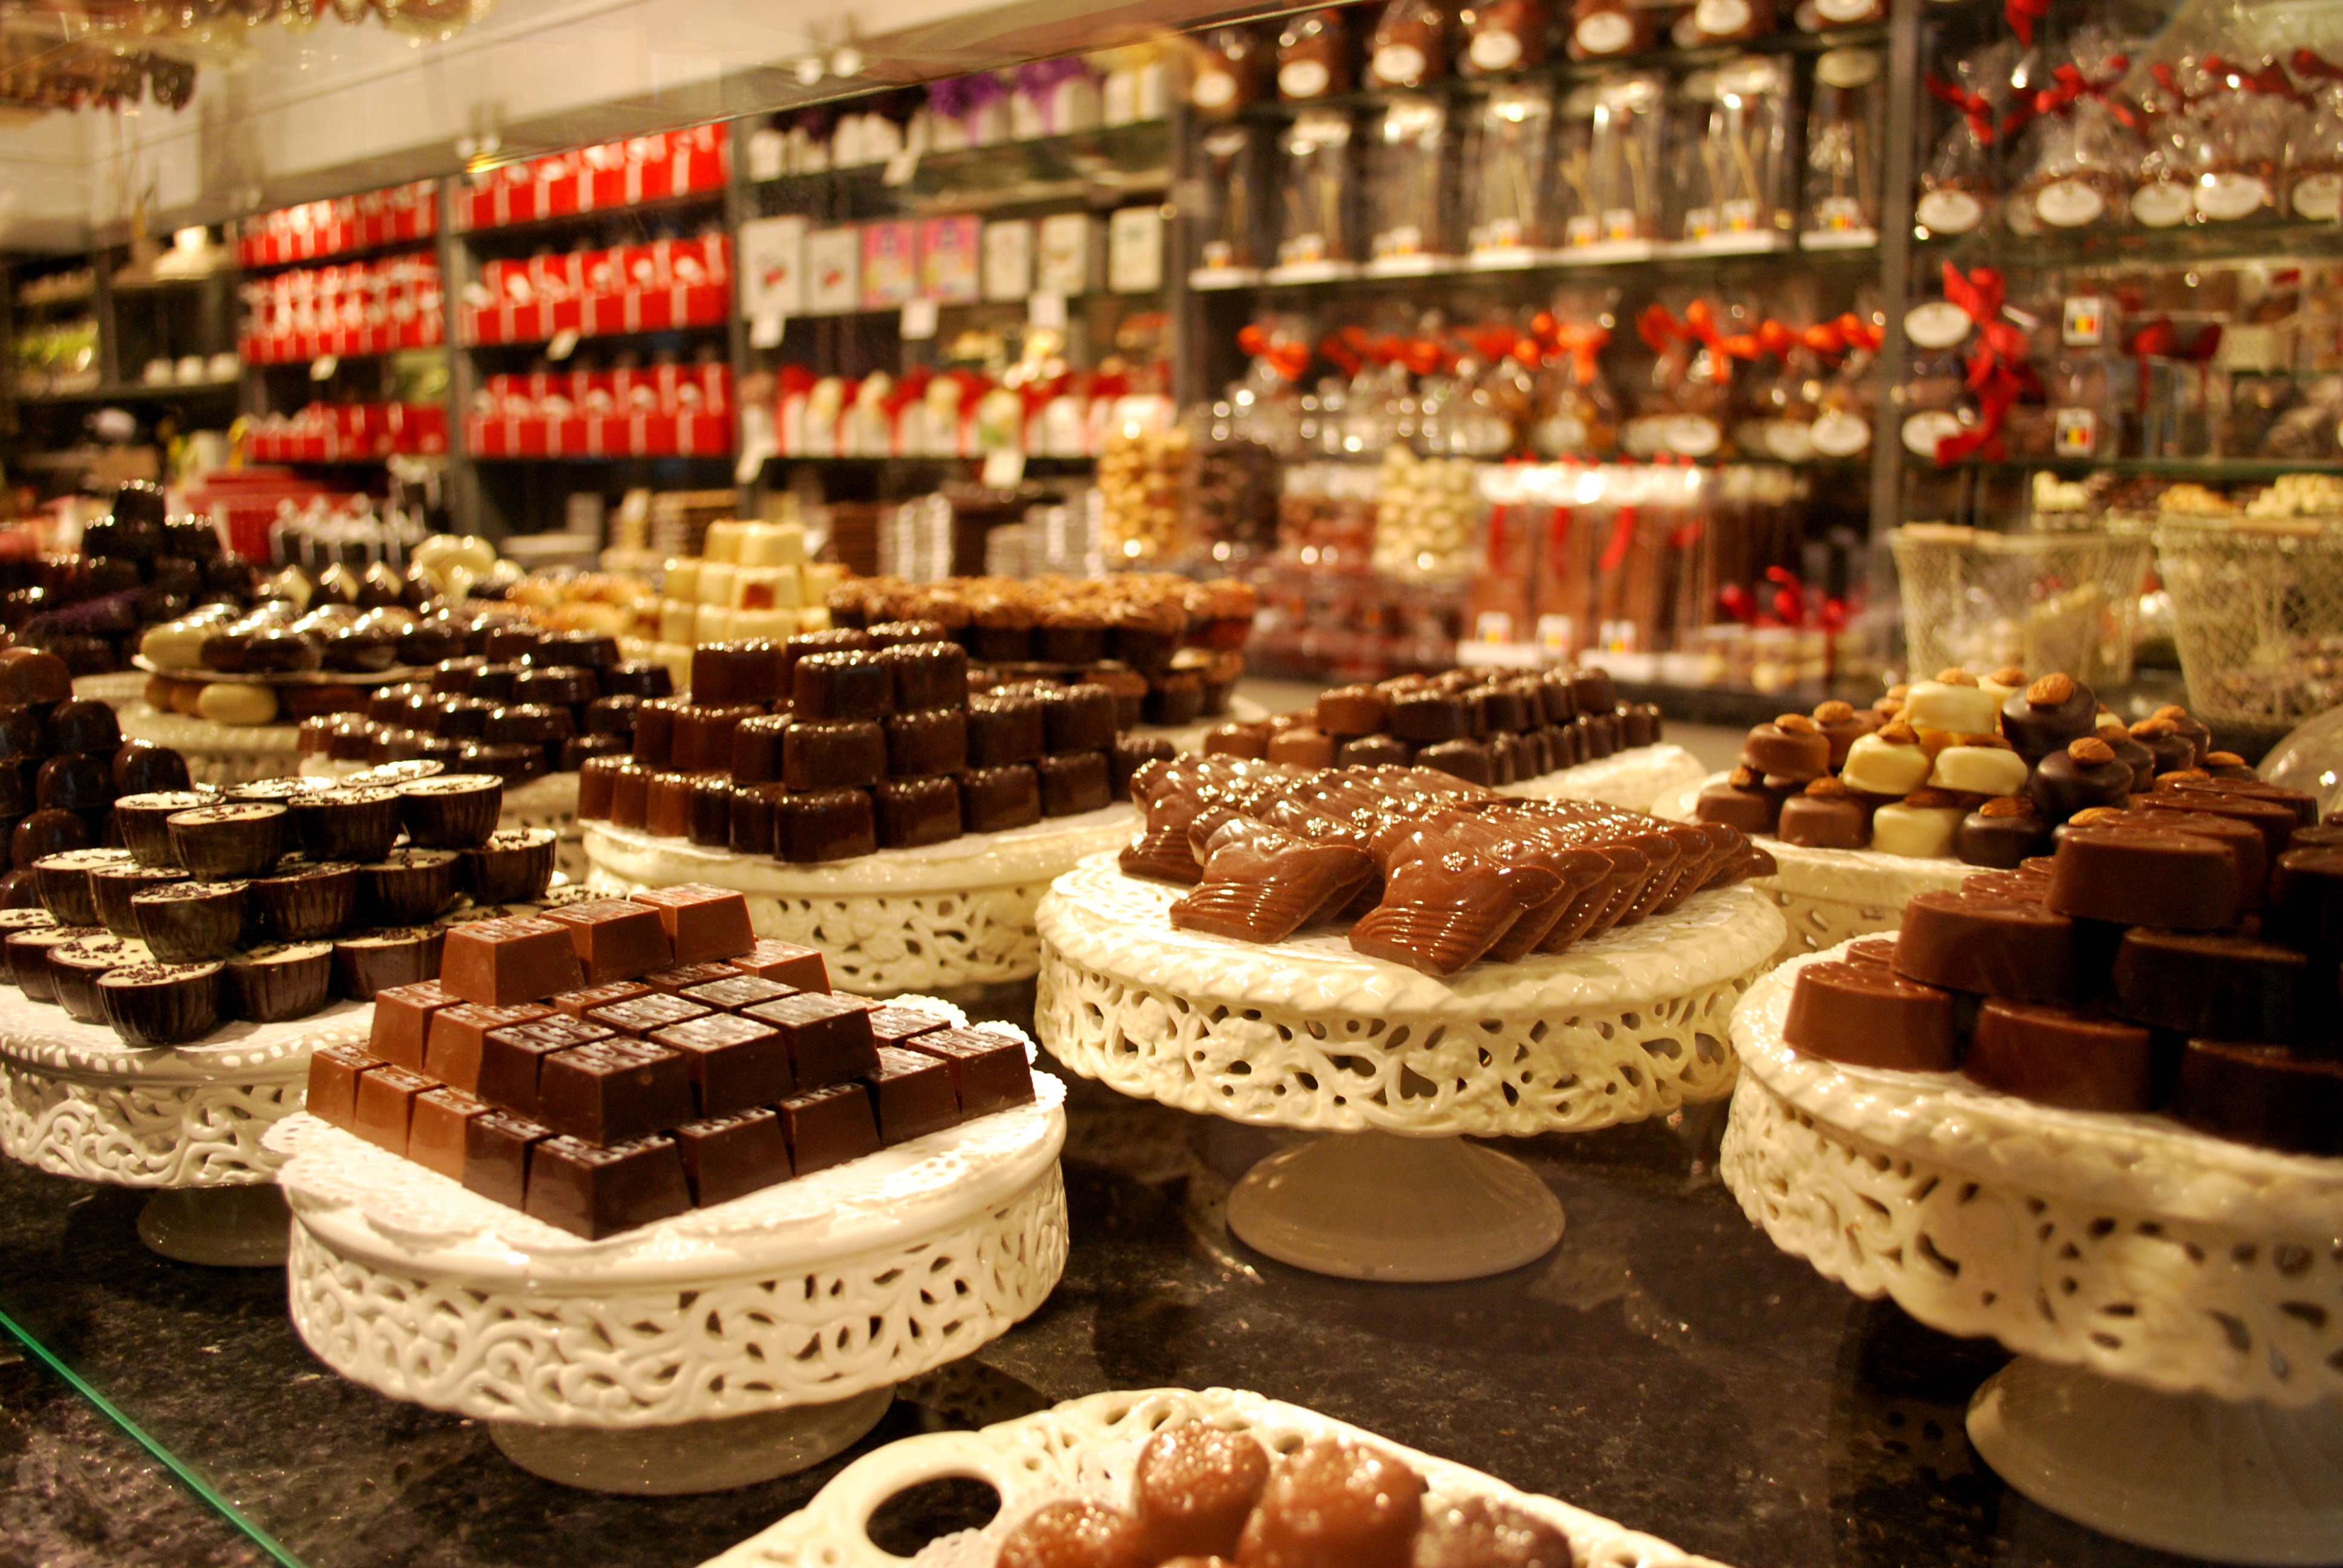 Amazing Chocolate Shop  Pictures & Backgrounds